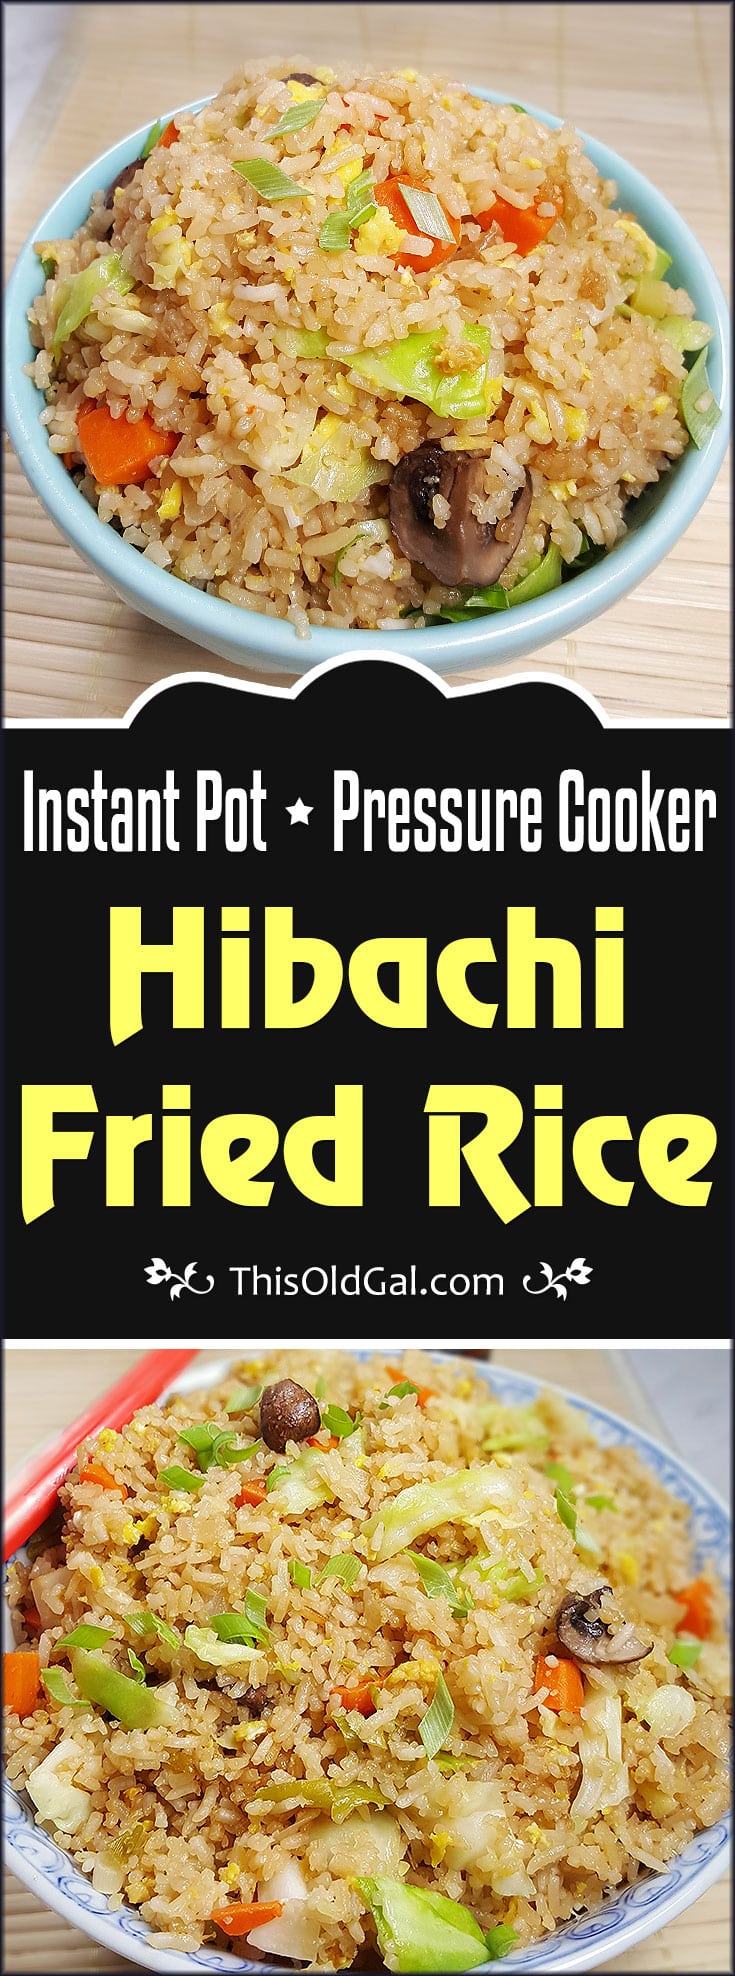 Instant Pot / Pressure Cooker Fried Rice